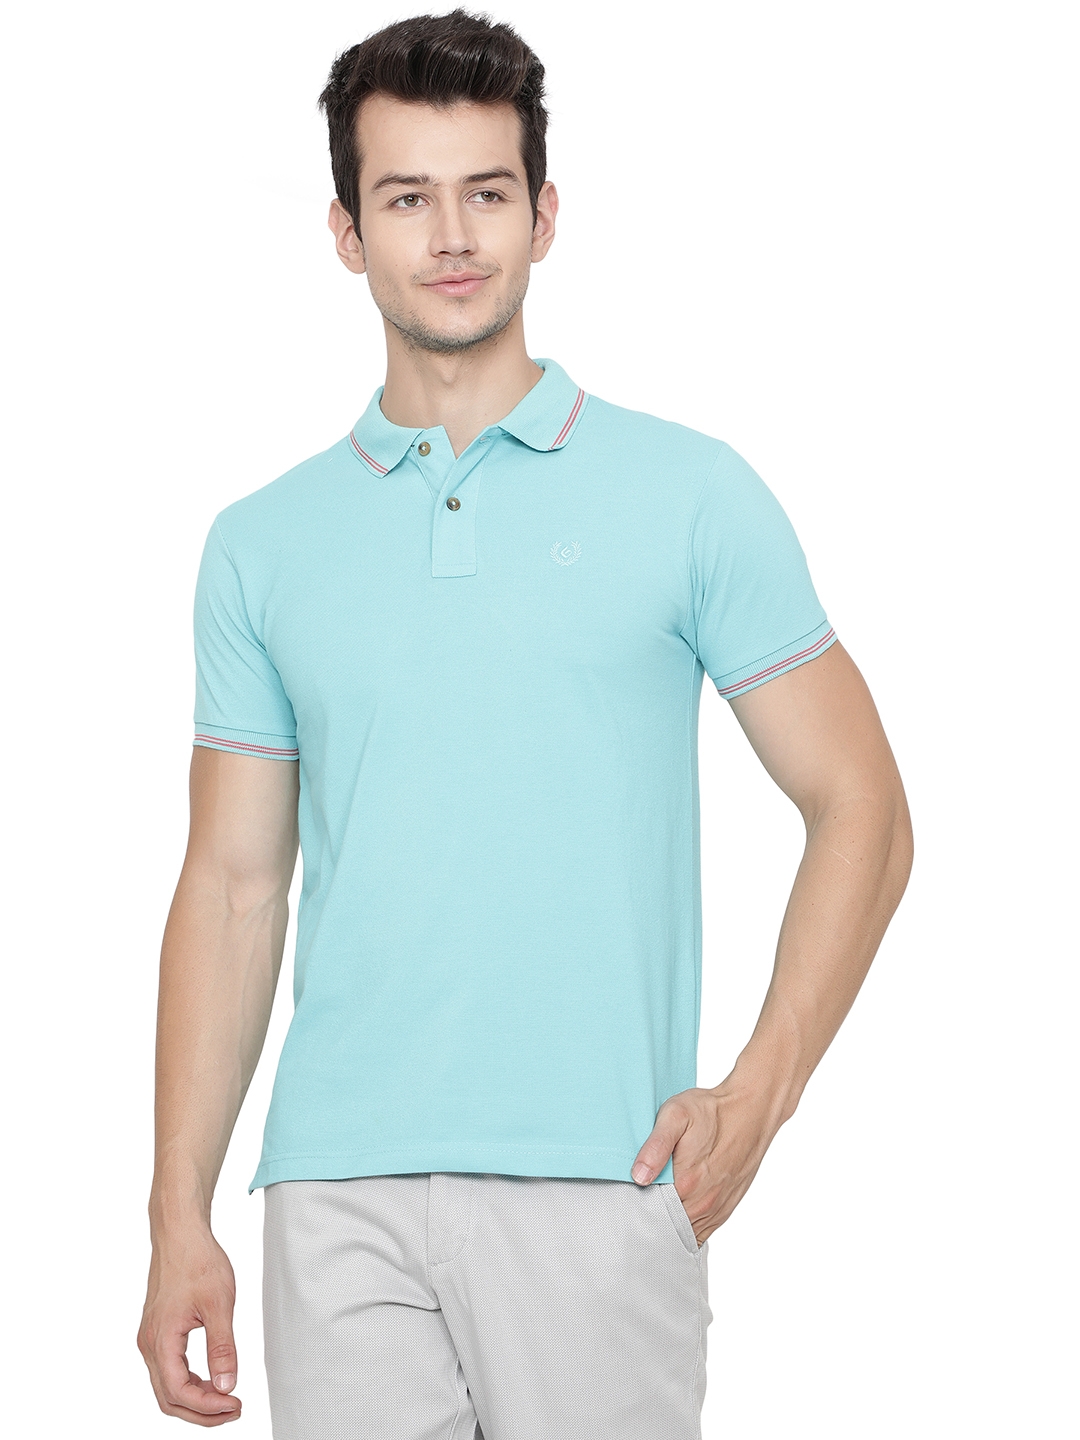 Greenfibre | Light Blue Solid Slim Fit Polo T-Shirt | Greenfibre